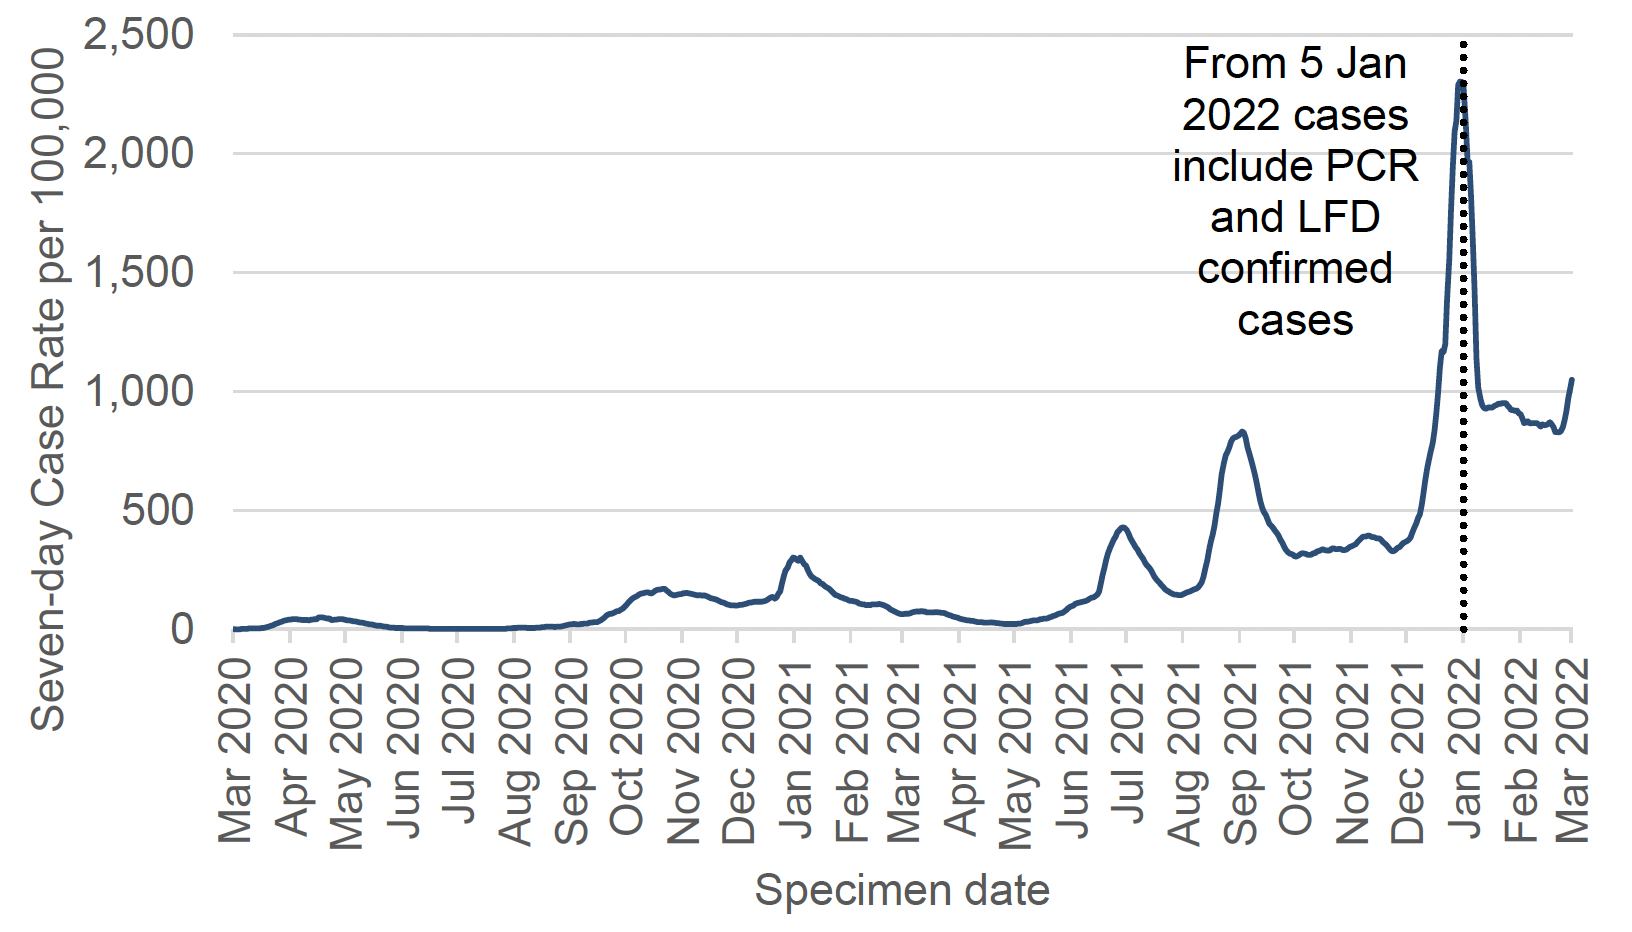 a line graph showing the seven-day case rate (including reinfections) by specimen date per 100,000 people in Scotland, using data from March 2020 up to and including March 2022. In this period, weekly case rates have peaked in January 2021, July 2021, September 2021 and early January 2022. There is an increase visible in early March 2022. The chart has a note that says: “from 5 January 2022 cases include PCR and LFD confirmed cases”. Before 5 January 2022, the case rate includes only PCR confirmed cases.